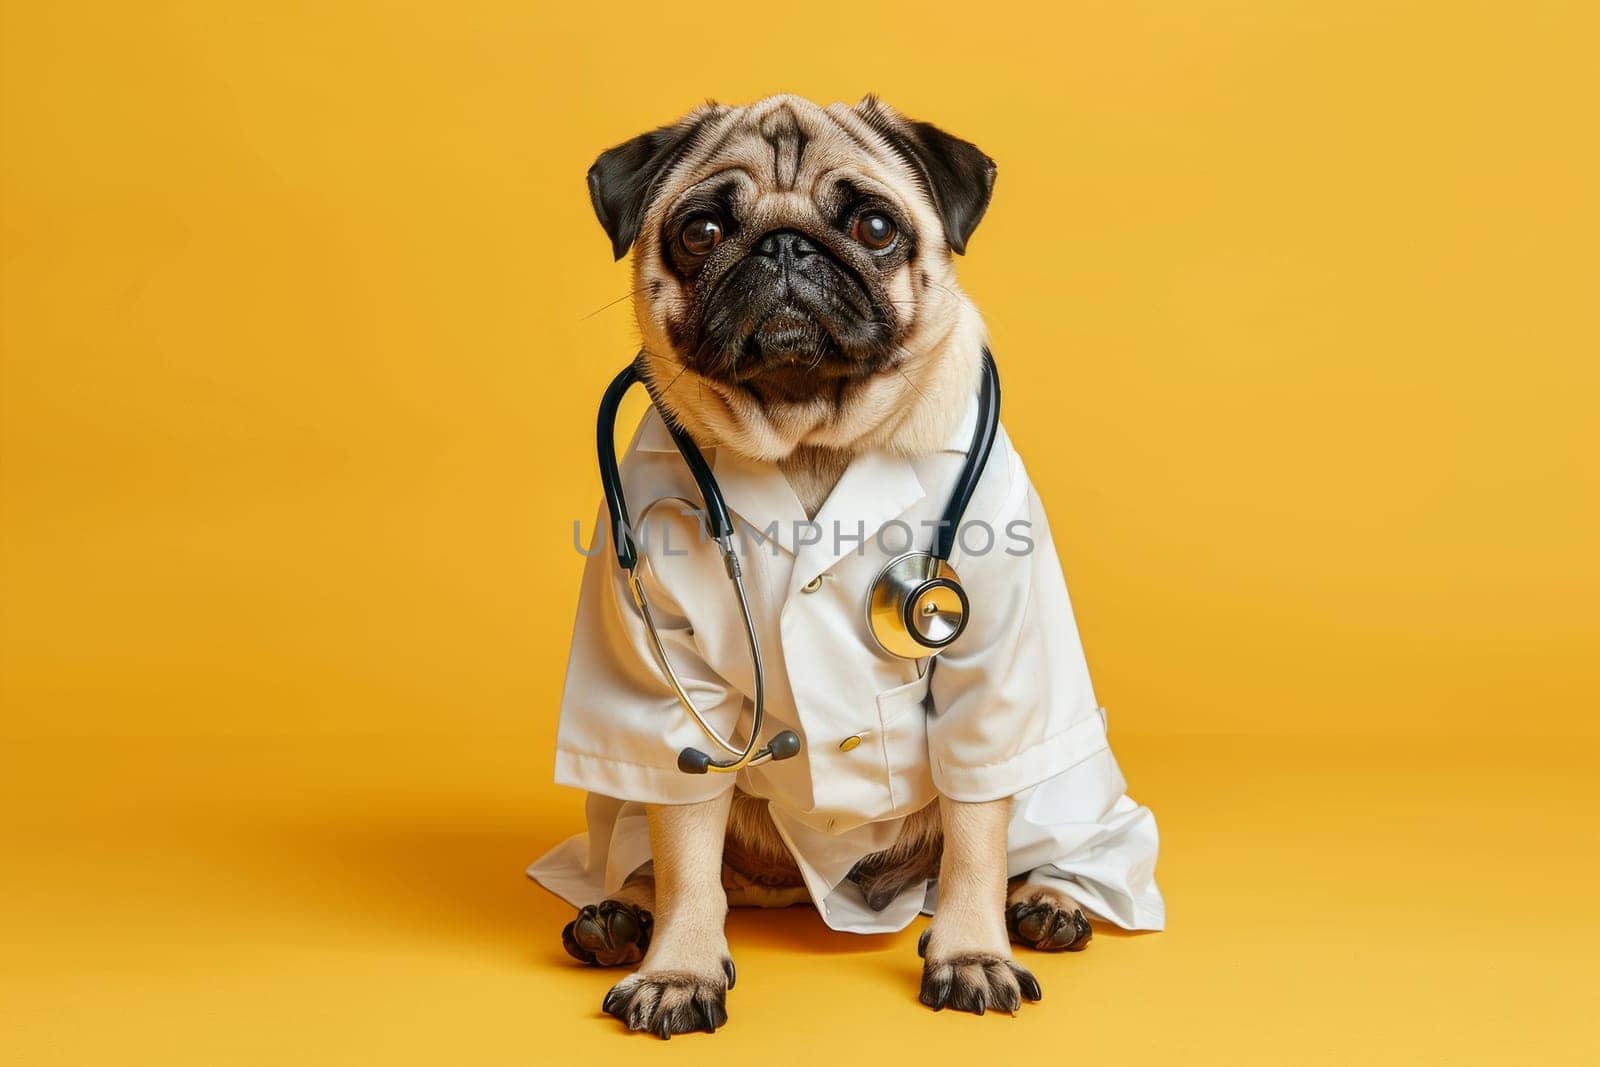 A small dog is wearing a white lab coat and a stethoscope. The dog appears to be a doctor, and the scene is set on a yellow background